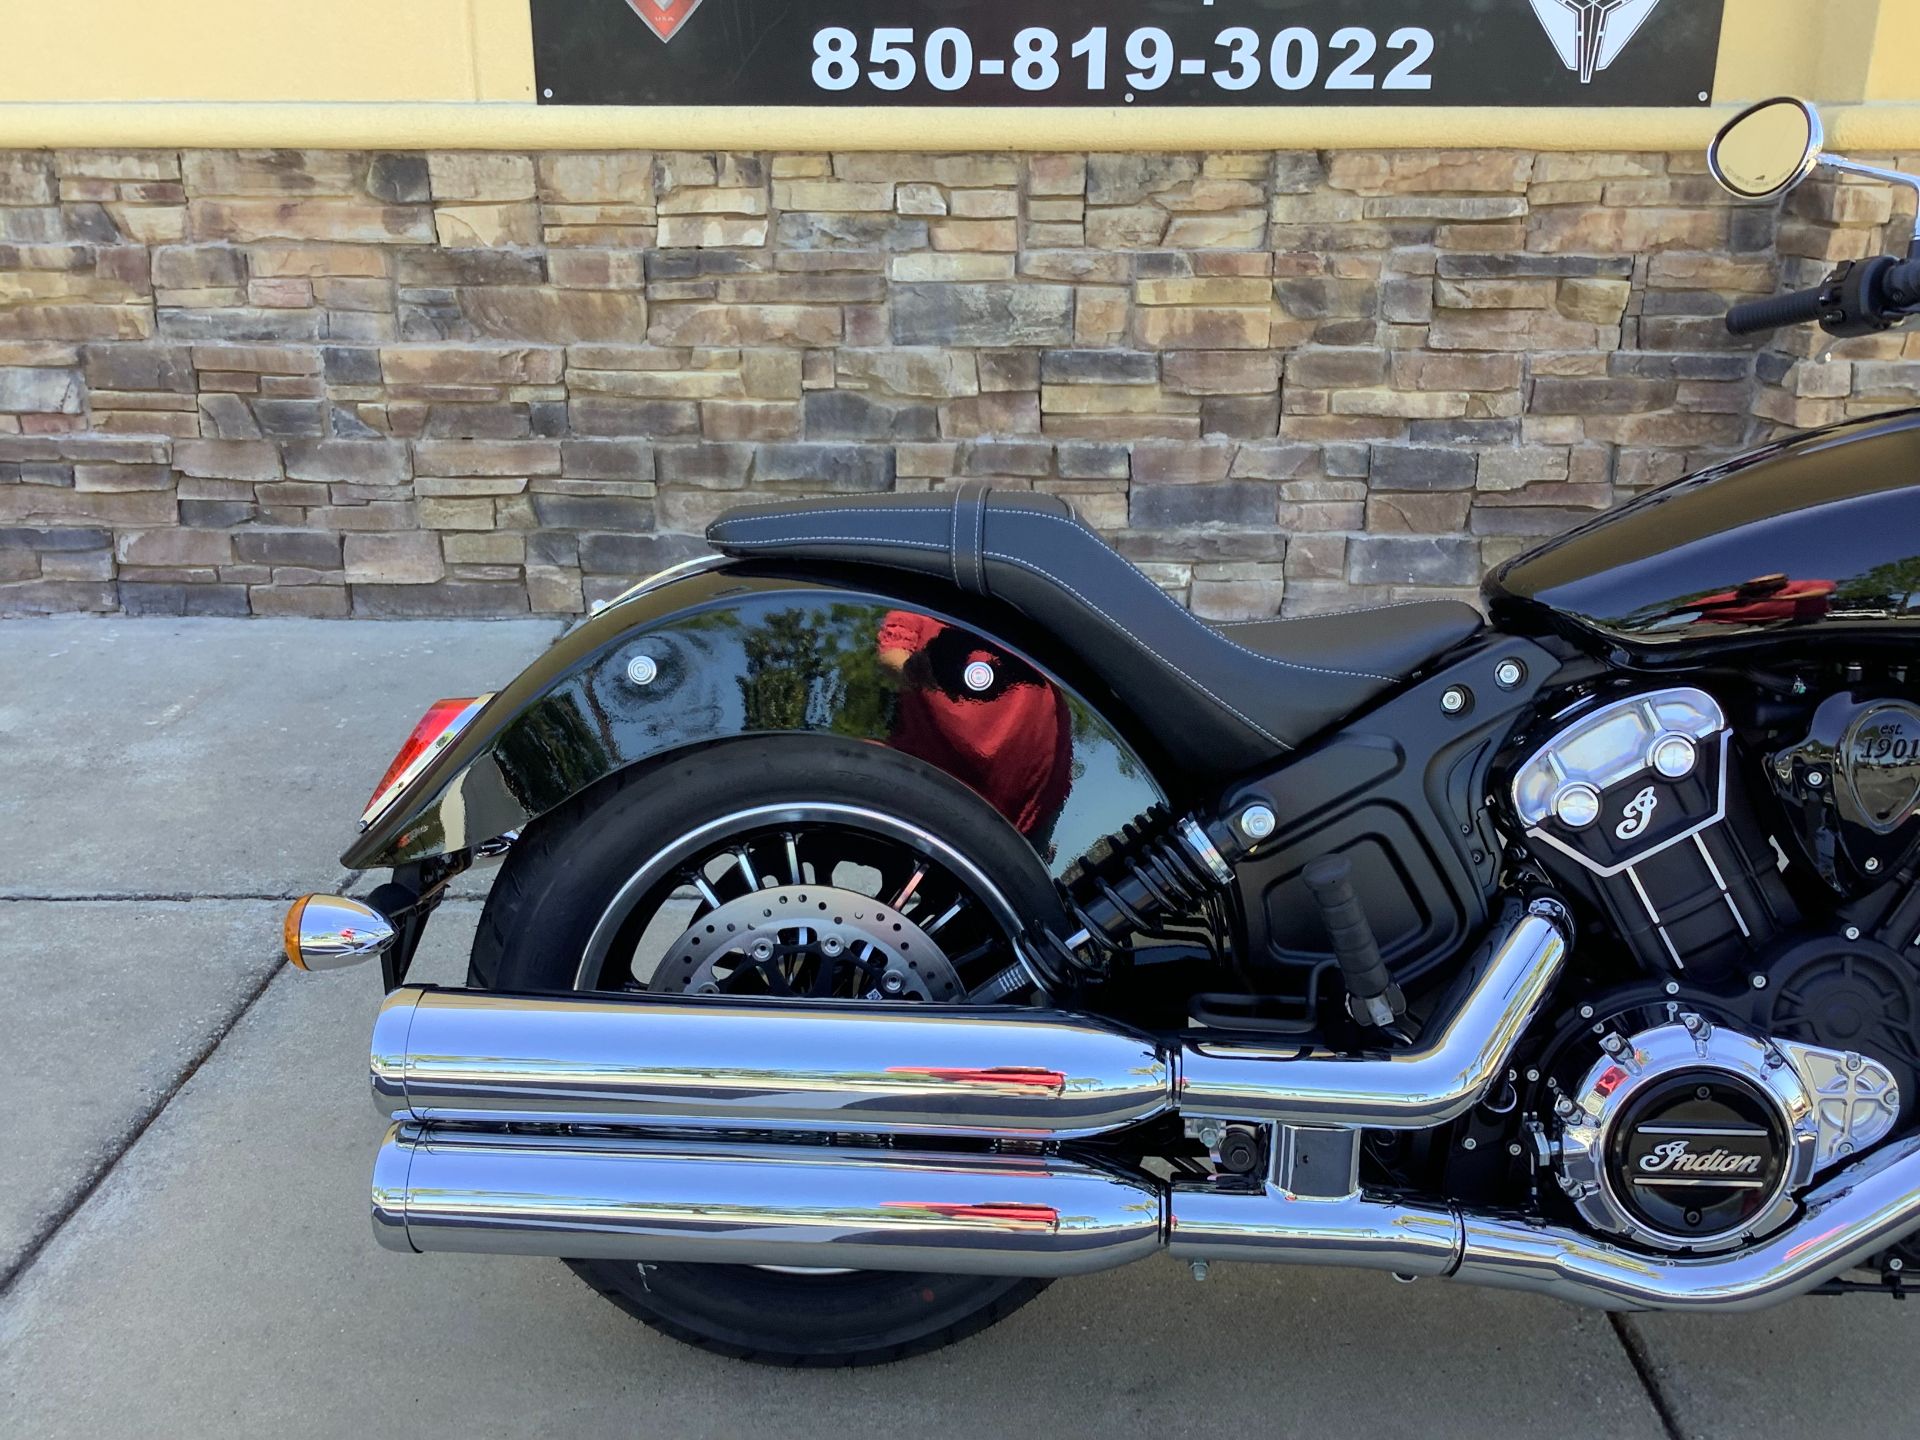 2022 Indian SCOUT NON ABS in Panama City Beach, Florida - Photo 5